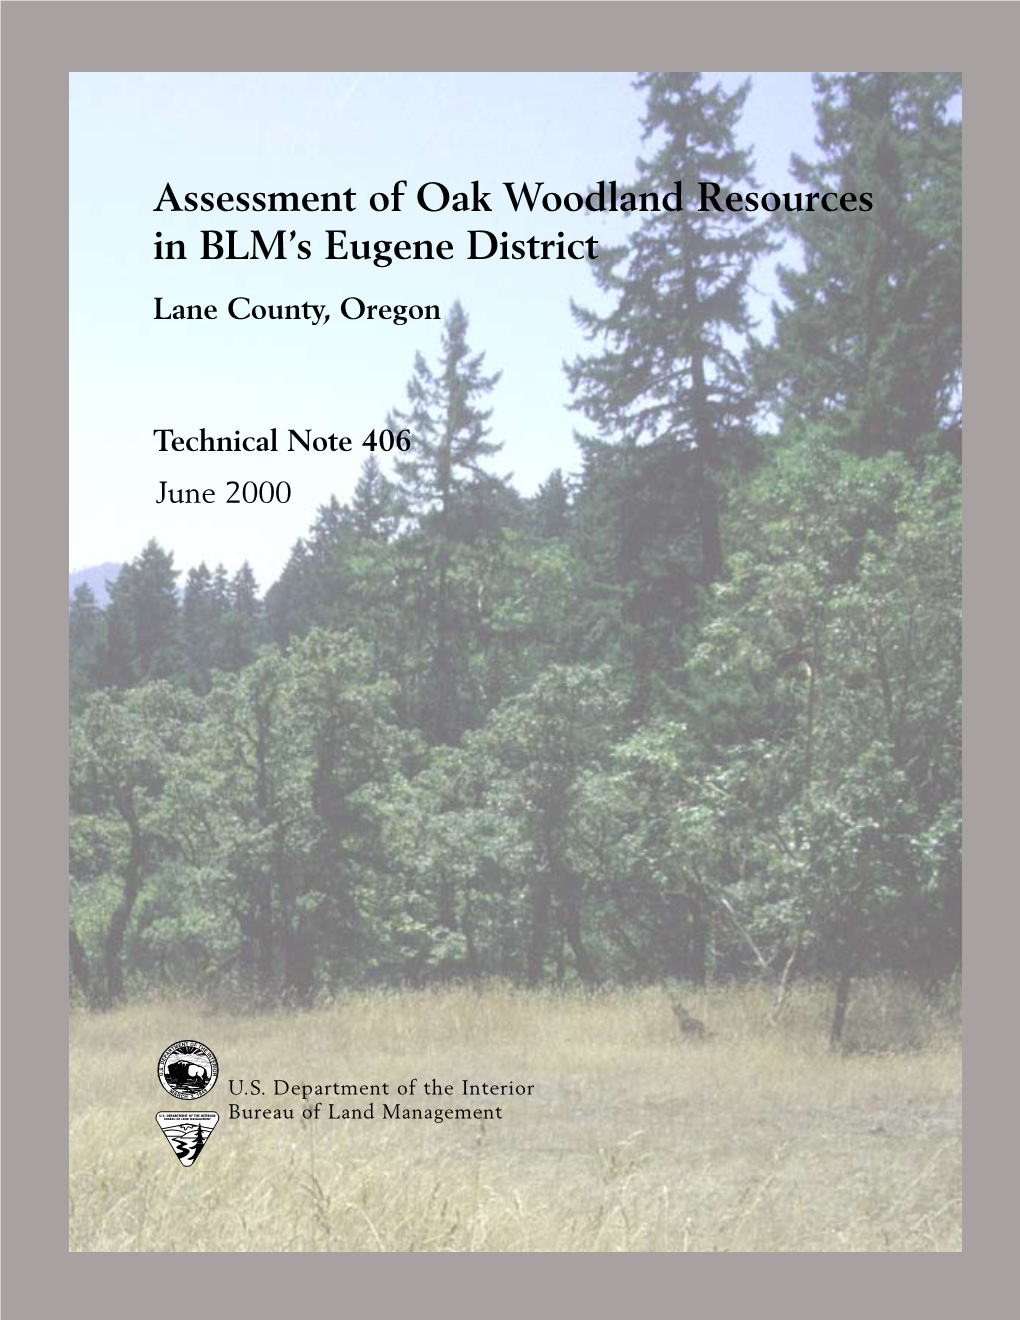 Assessment of Oak Woodland Resources in BLM's Eugene District